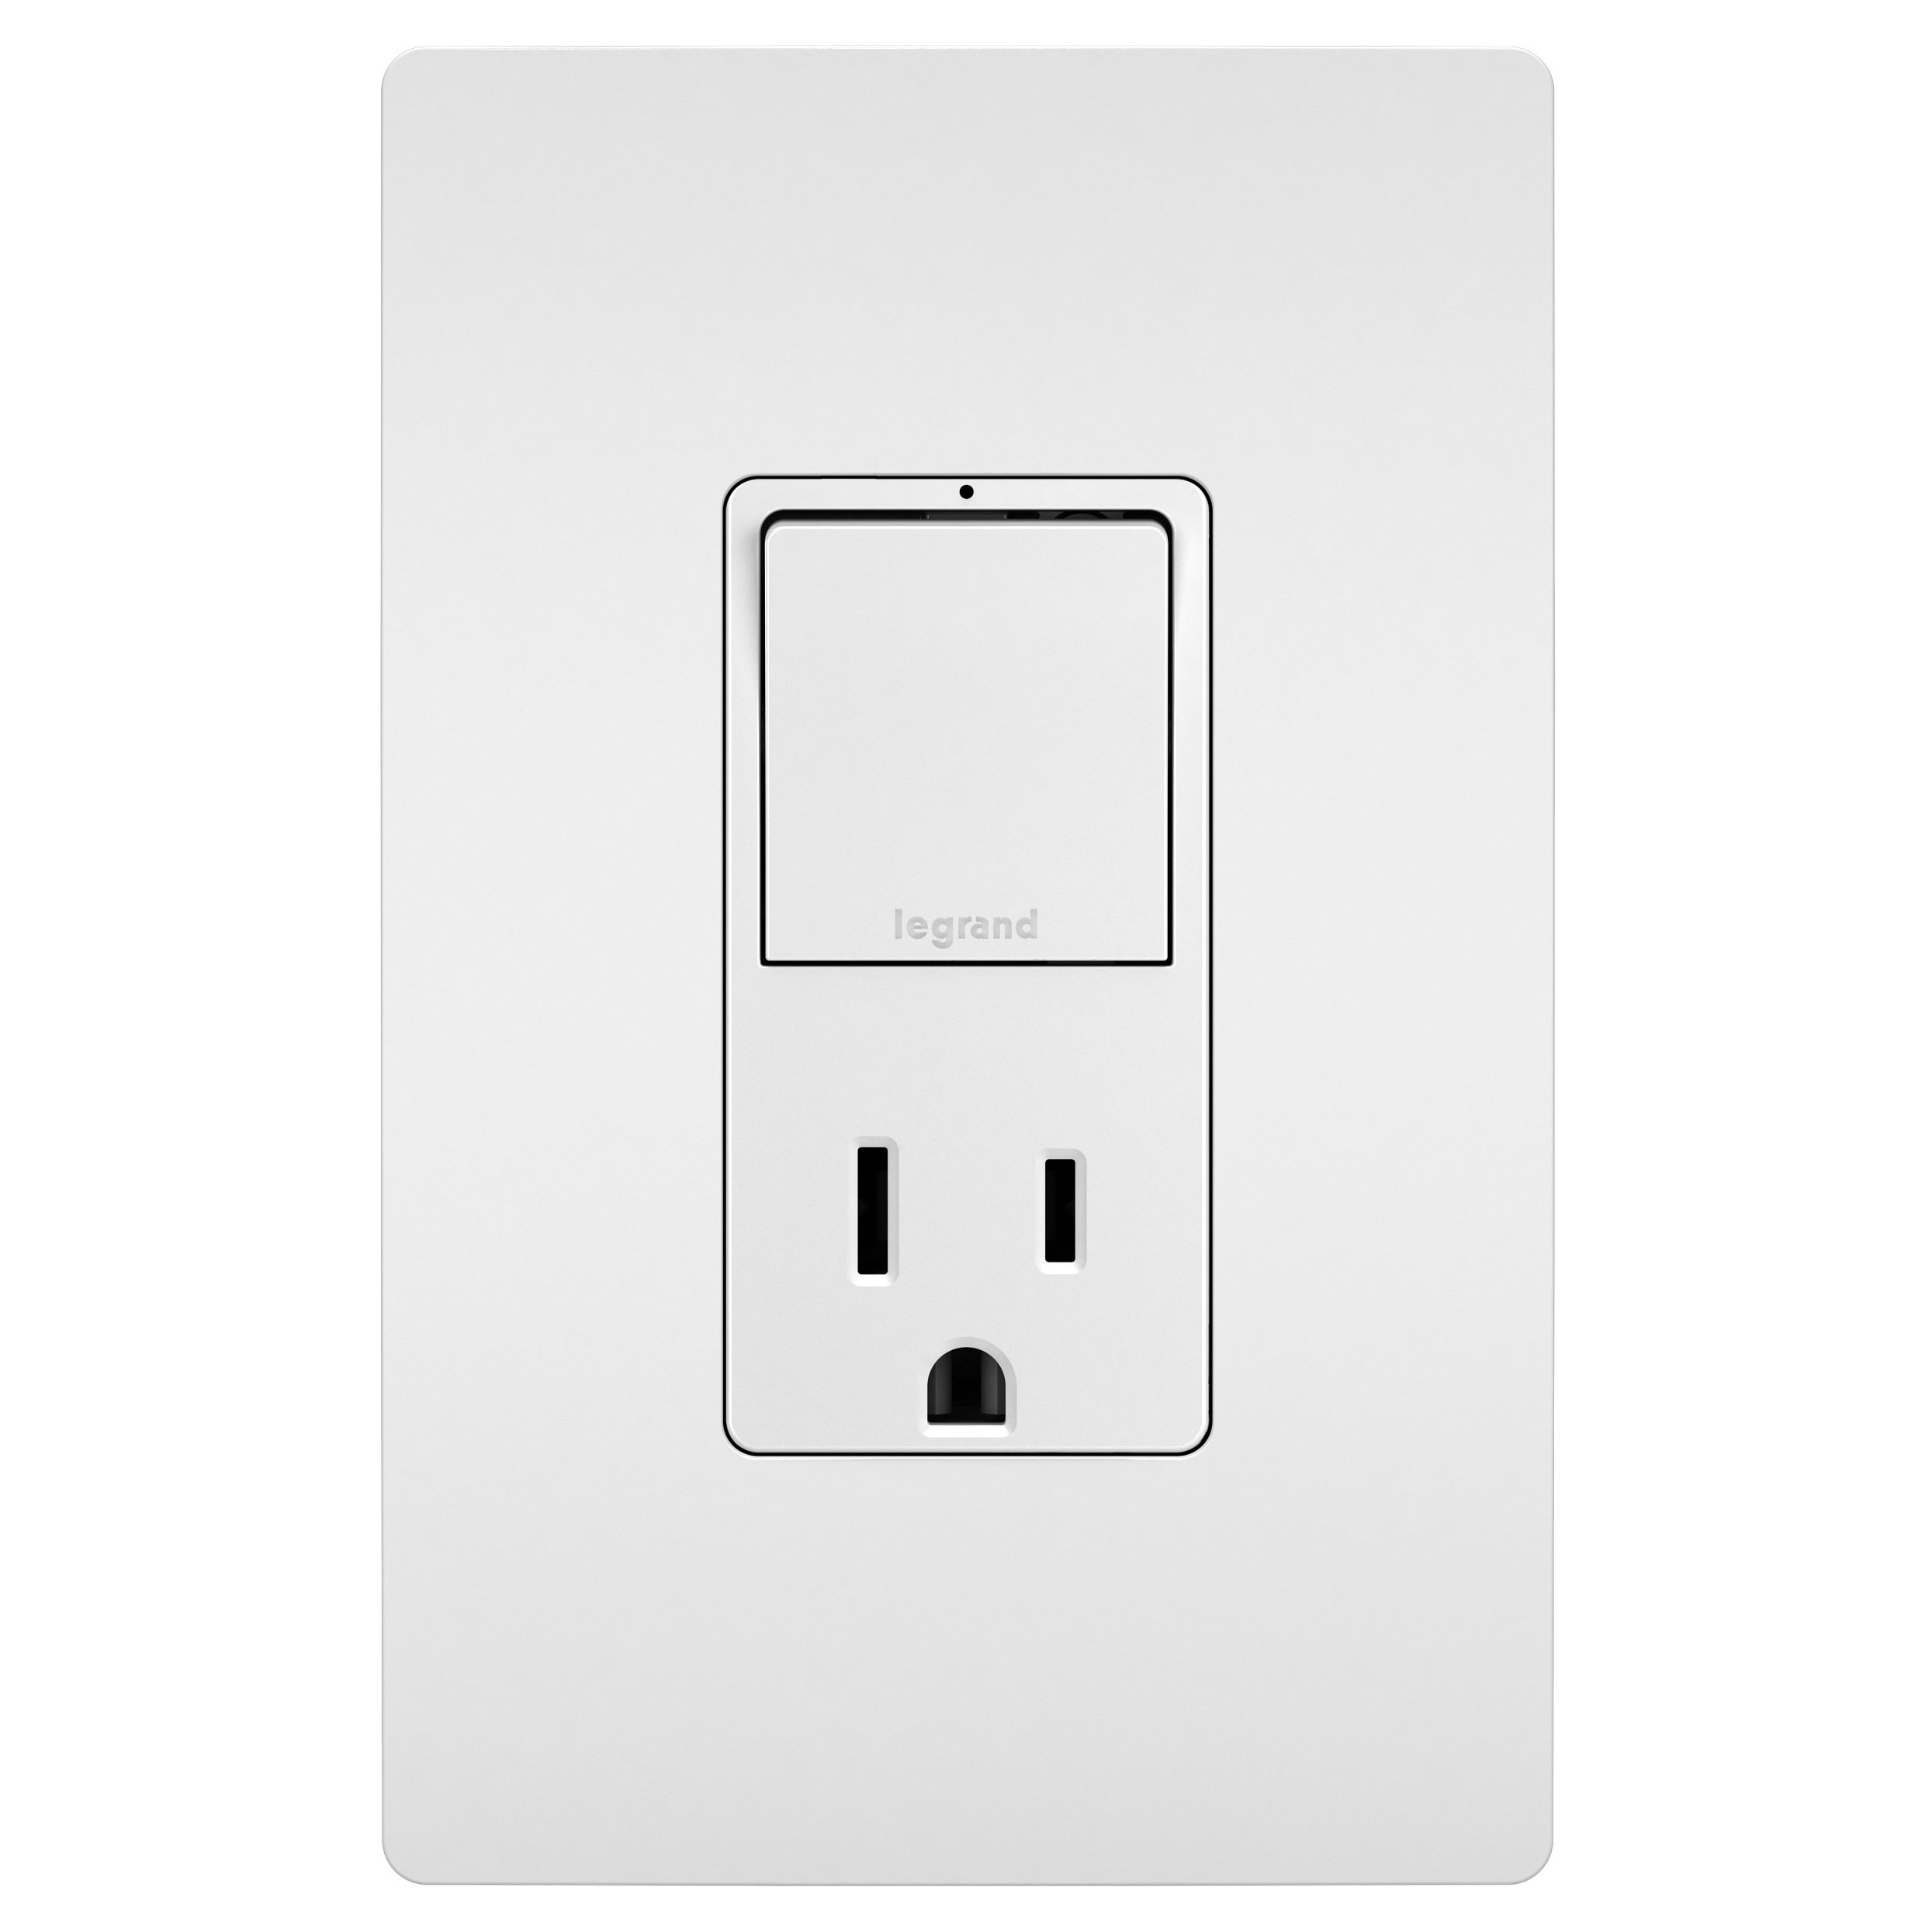 Legrand radiant Smart 15-amp Single-pole/3-way Smart Illuminated Rocker  Light Switch with Wall Plate, White in the Light Switches department at